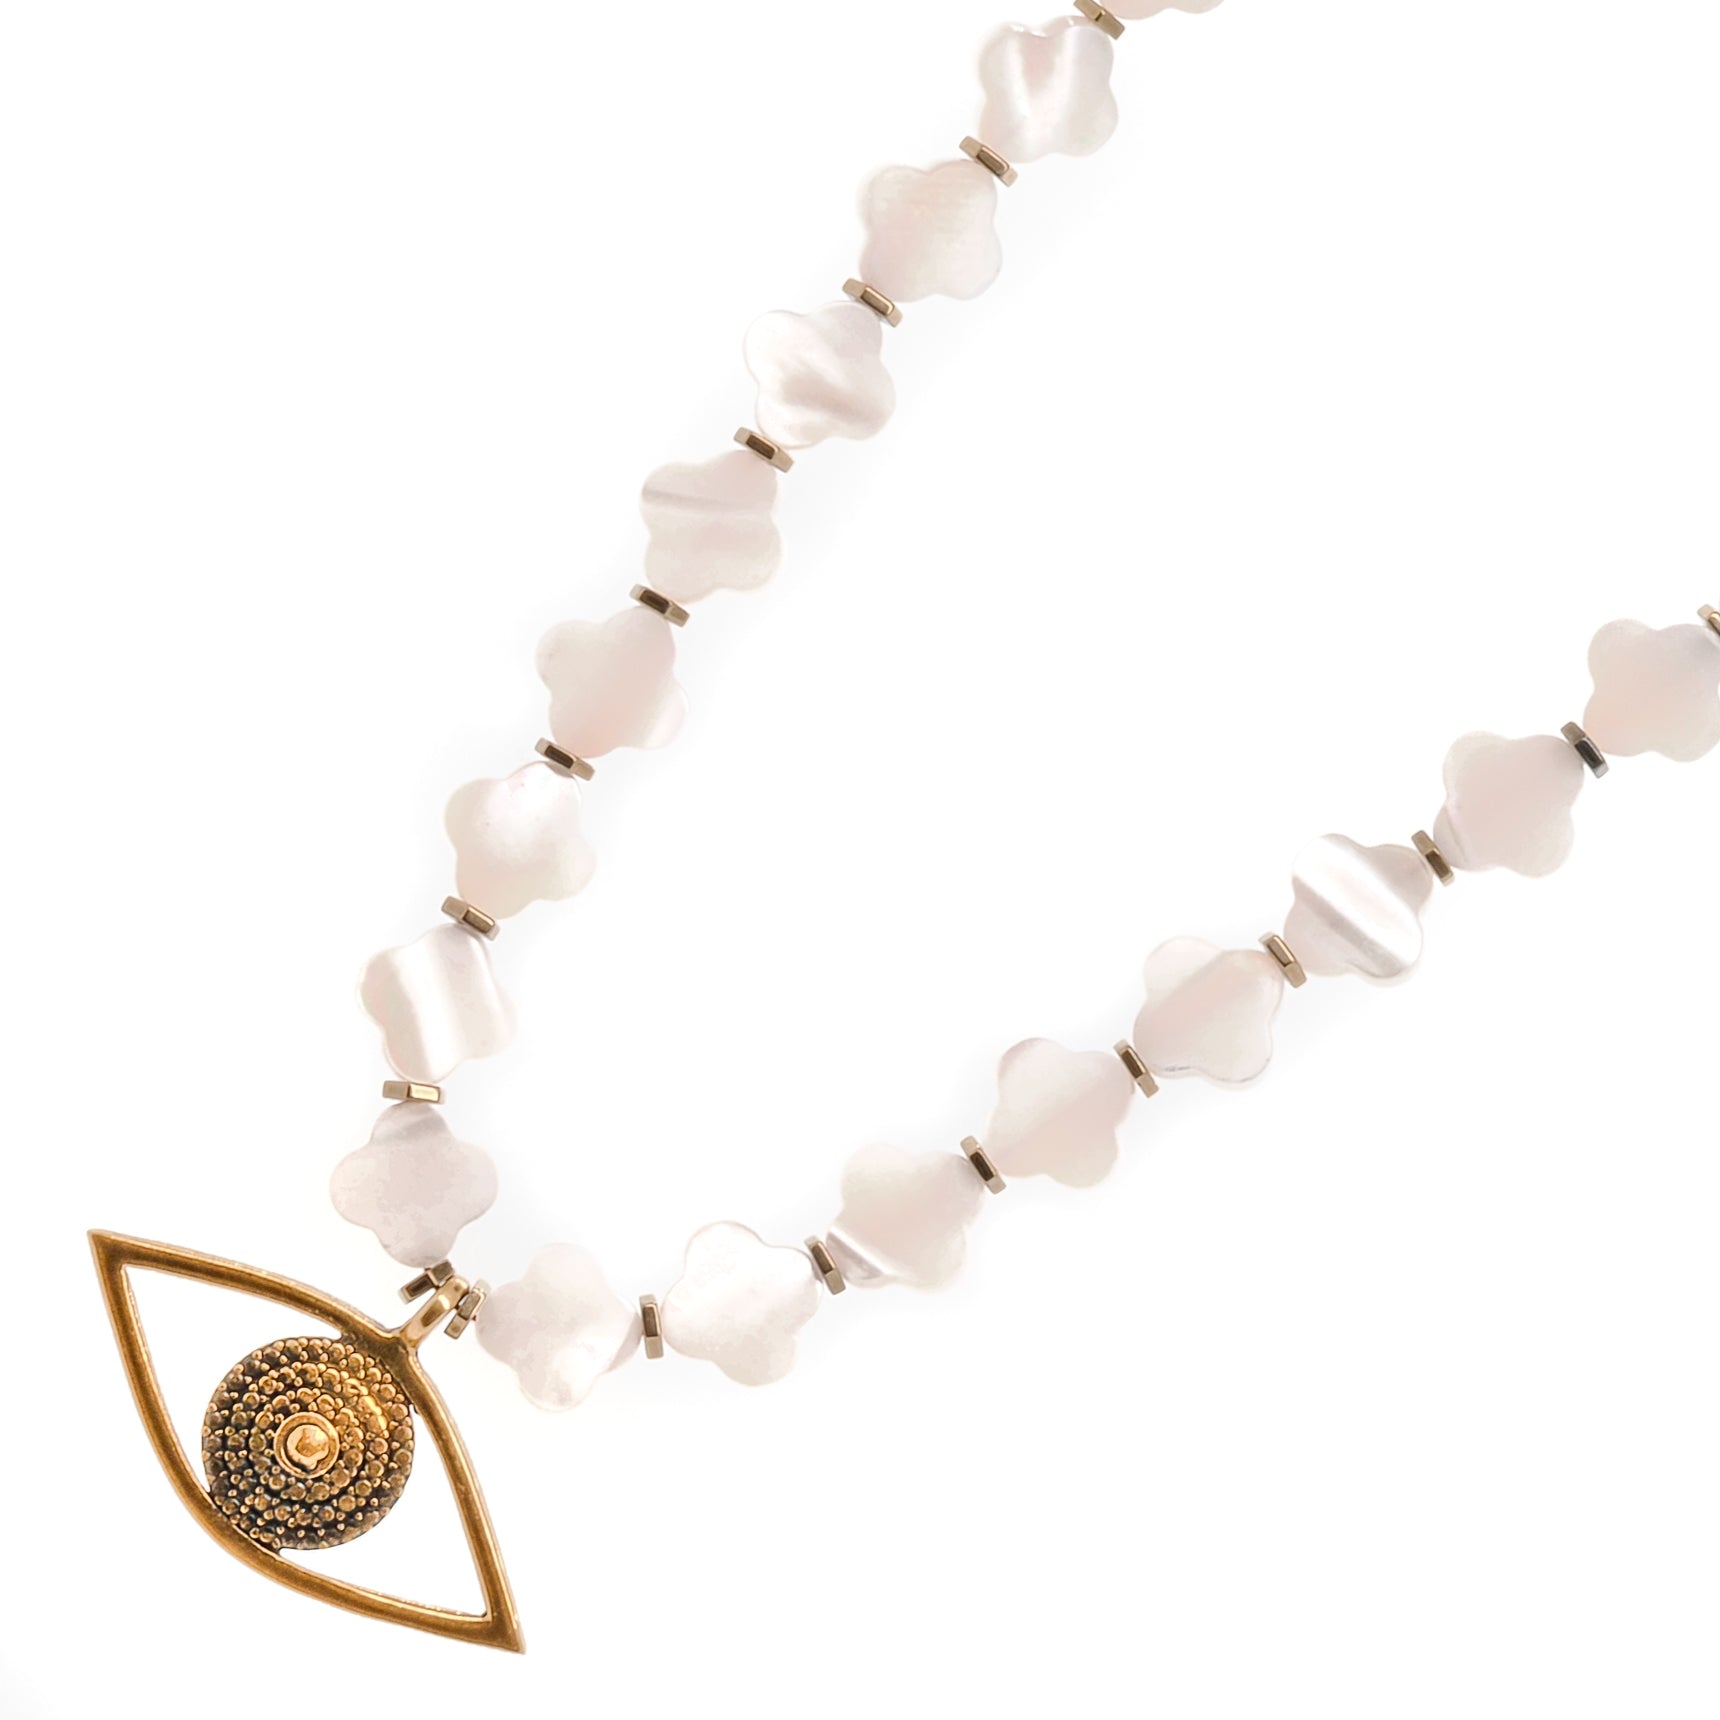 The Alhambra Evil Eye Choker Necklace is a stunning statement piece that&#39;s perfect for layering with other necklaces, featuring delicate pearl Alhambra flower beads and a powerful Evil Eye Pendant.